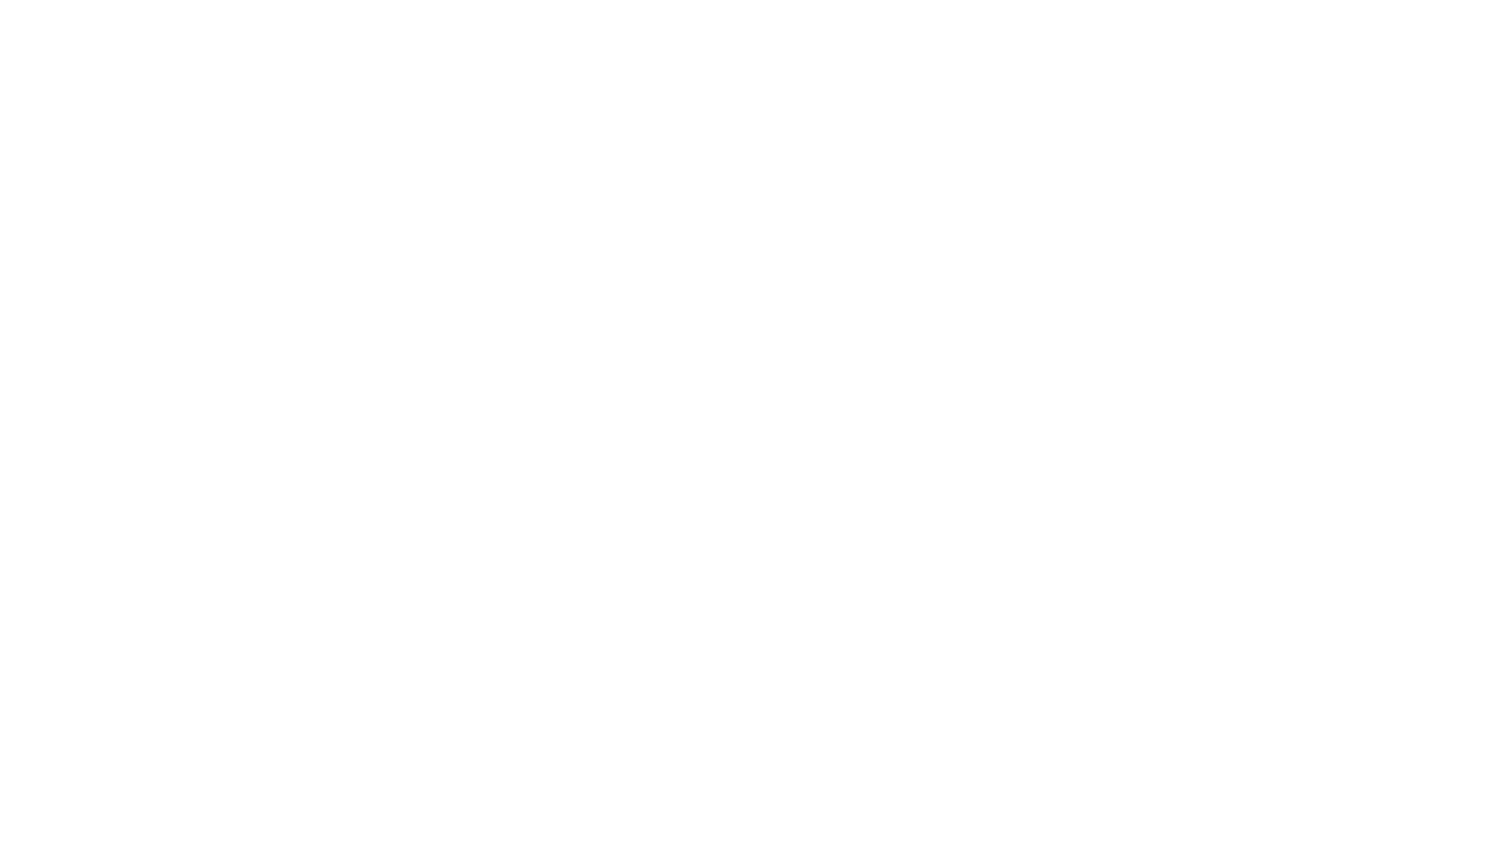 English-language proofreading and editing services